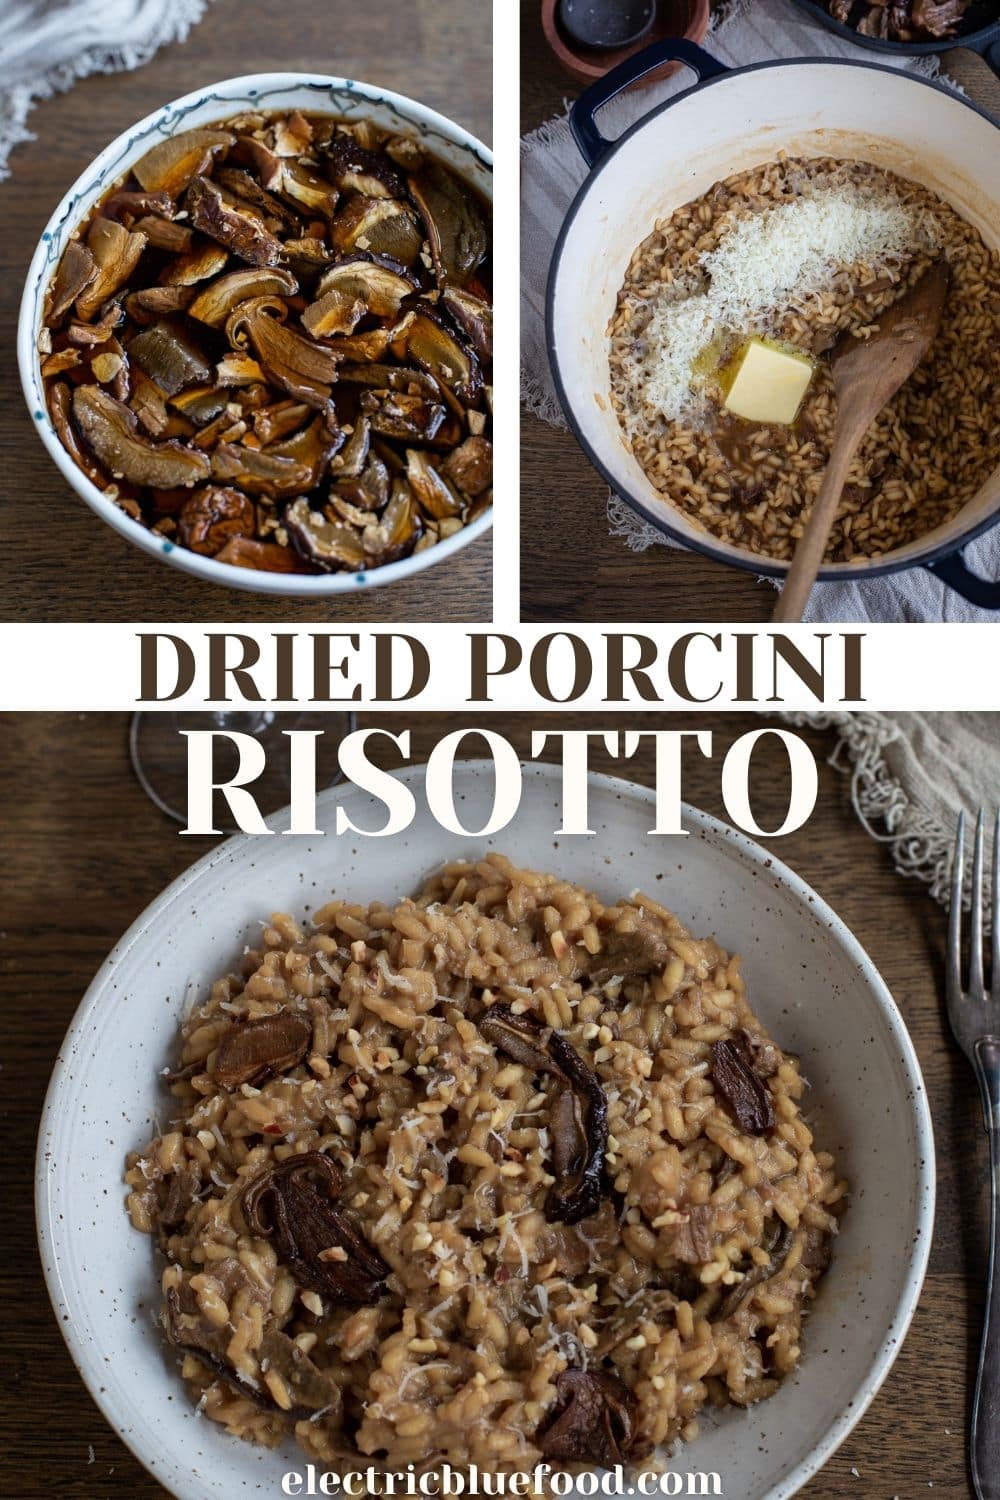 Mushroom risotto with dried porcini and chopped hazelnuts. Dried porcini are re-hydrated in water and used as main ingredient in this gourmet risotto recipe.